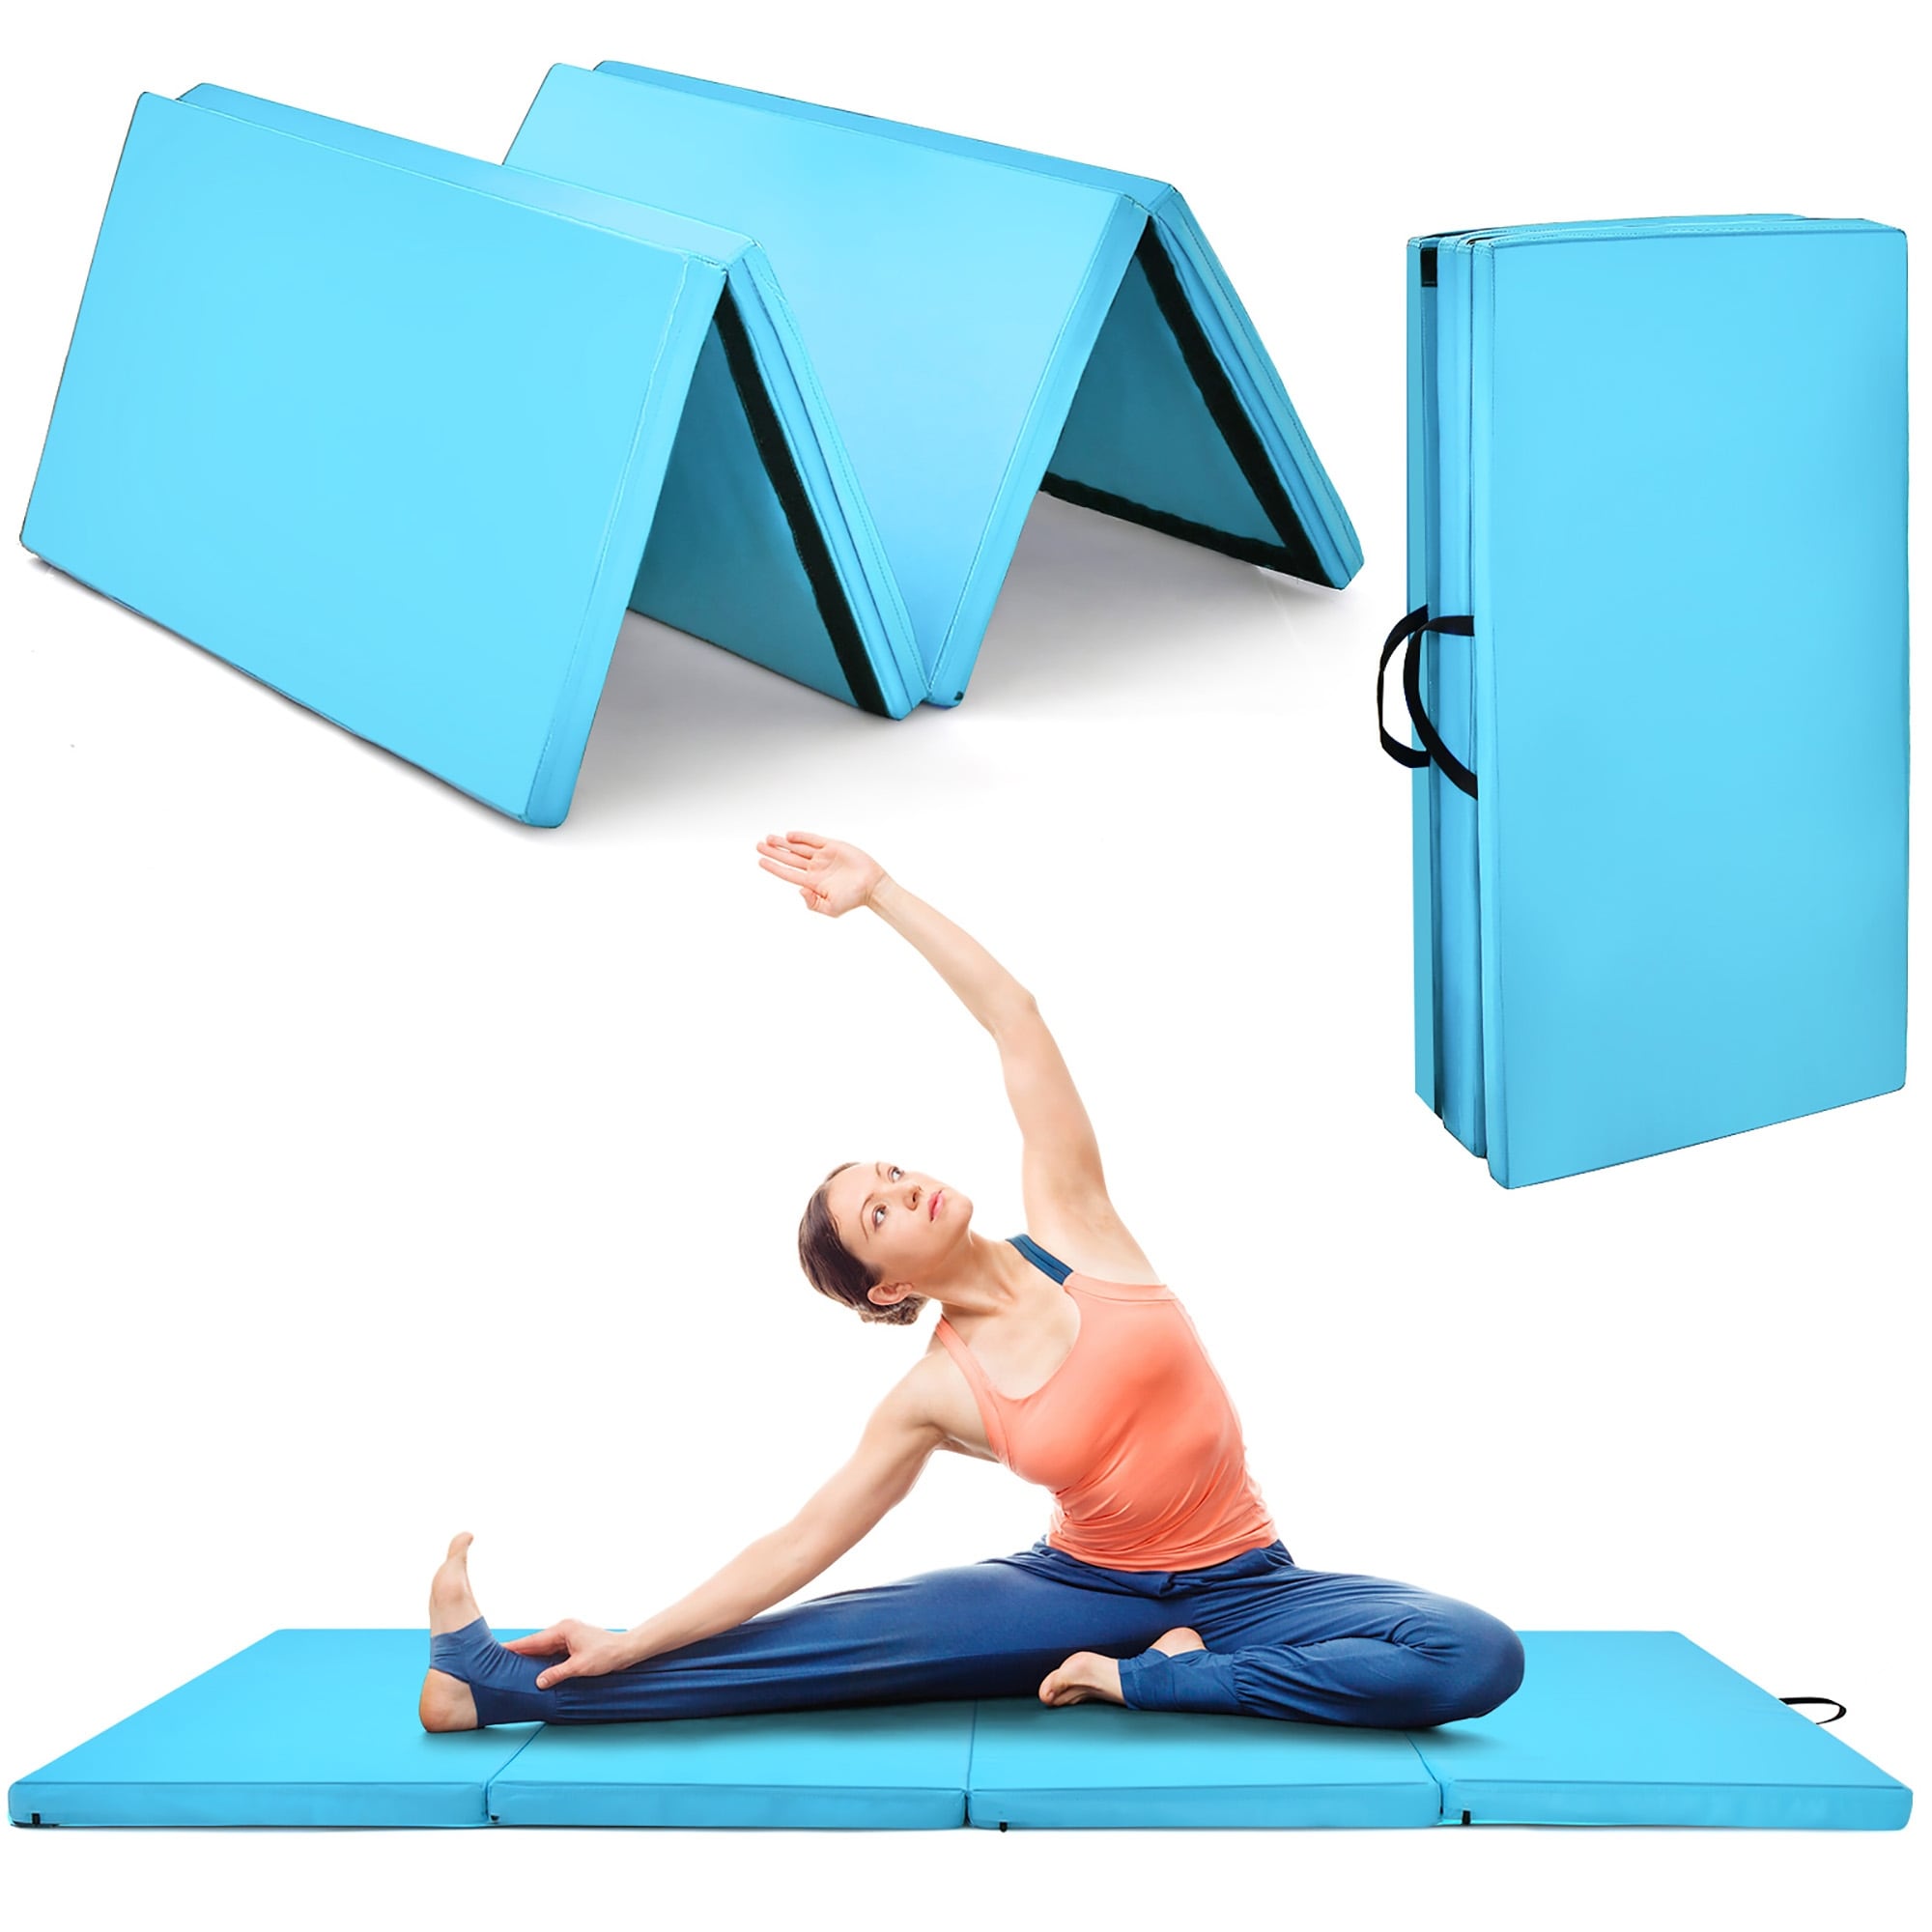 Portable Folding Exercise Gymnastics Mats great for any workout